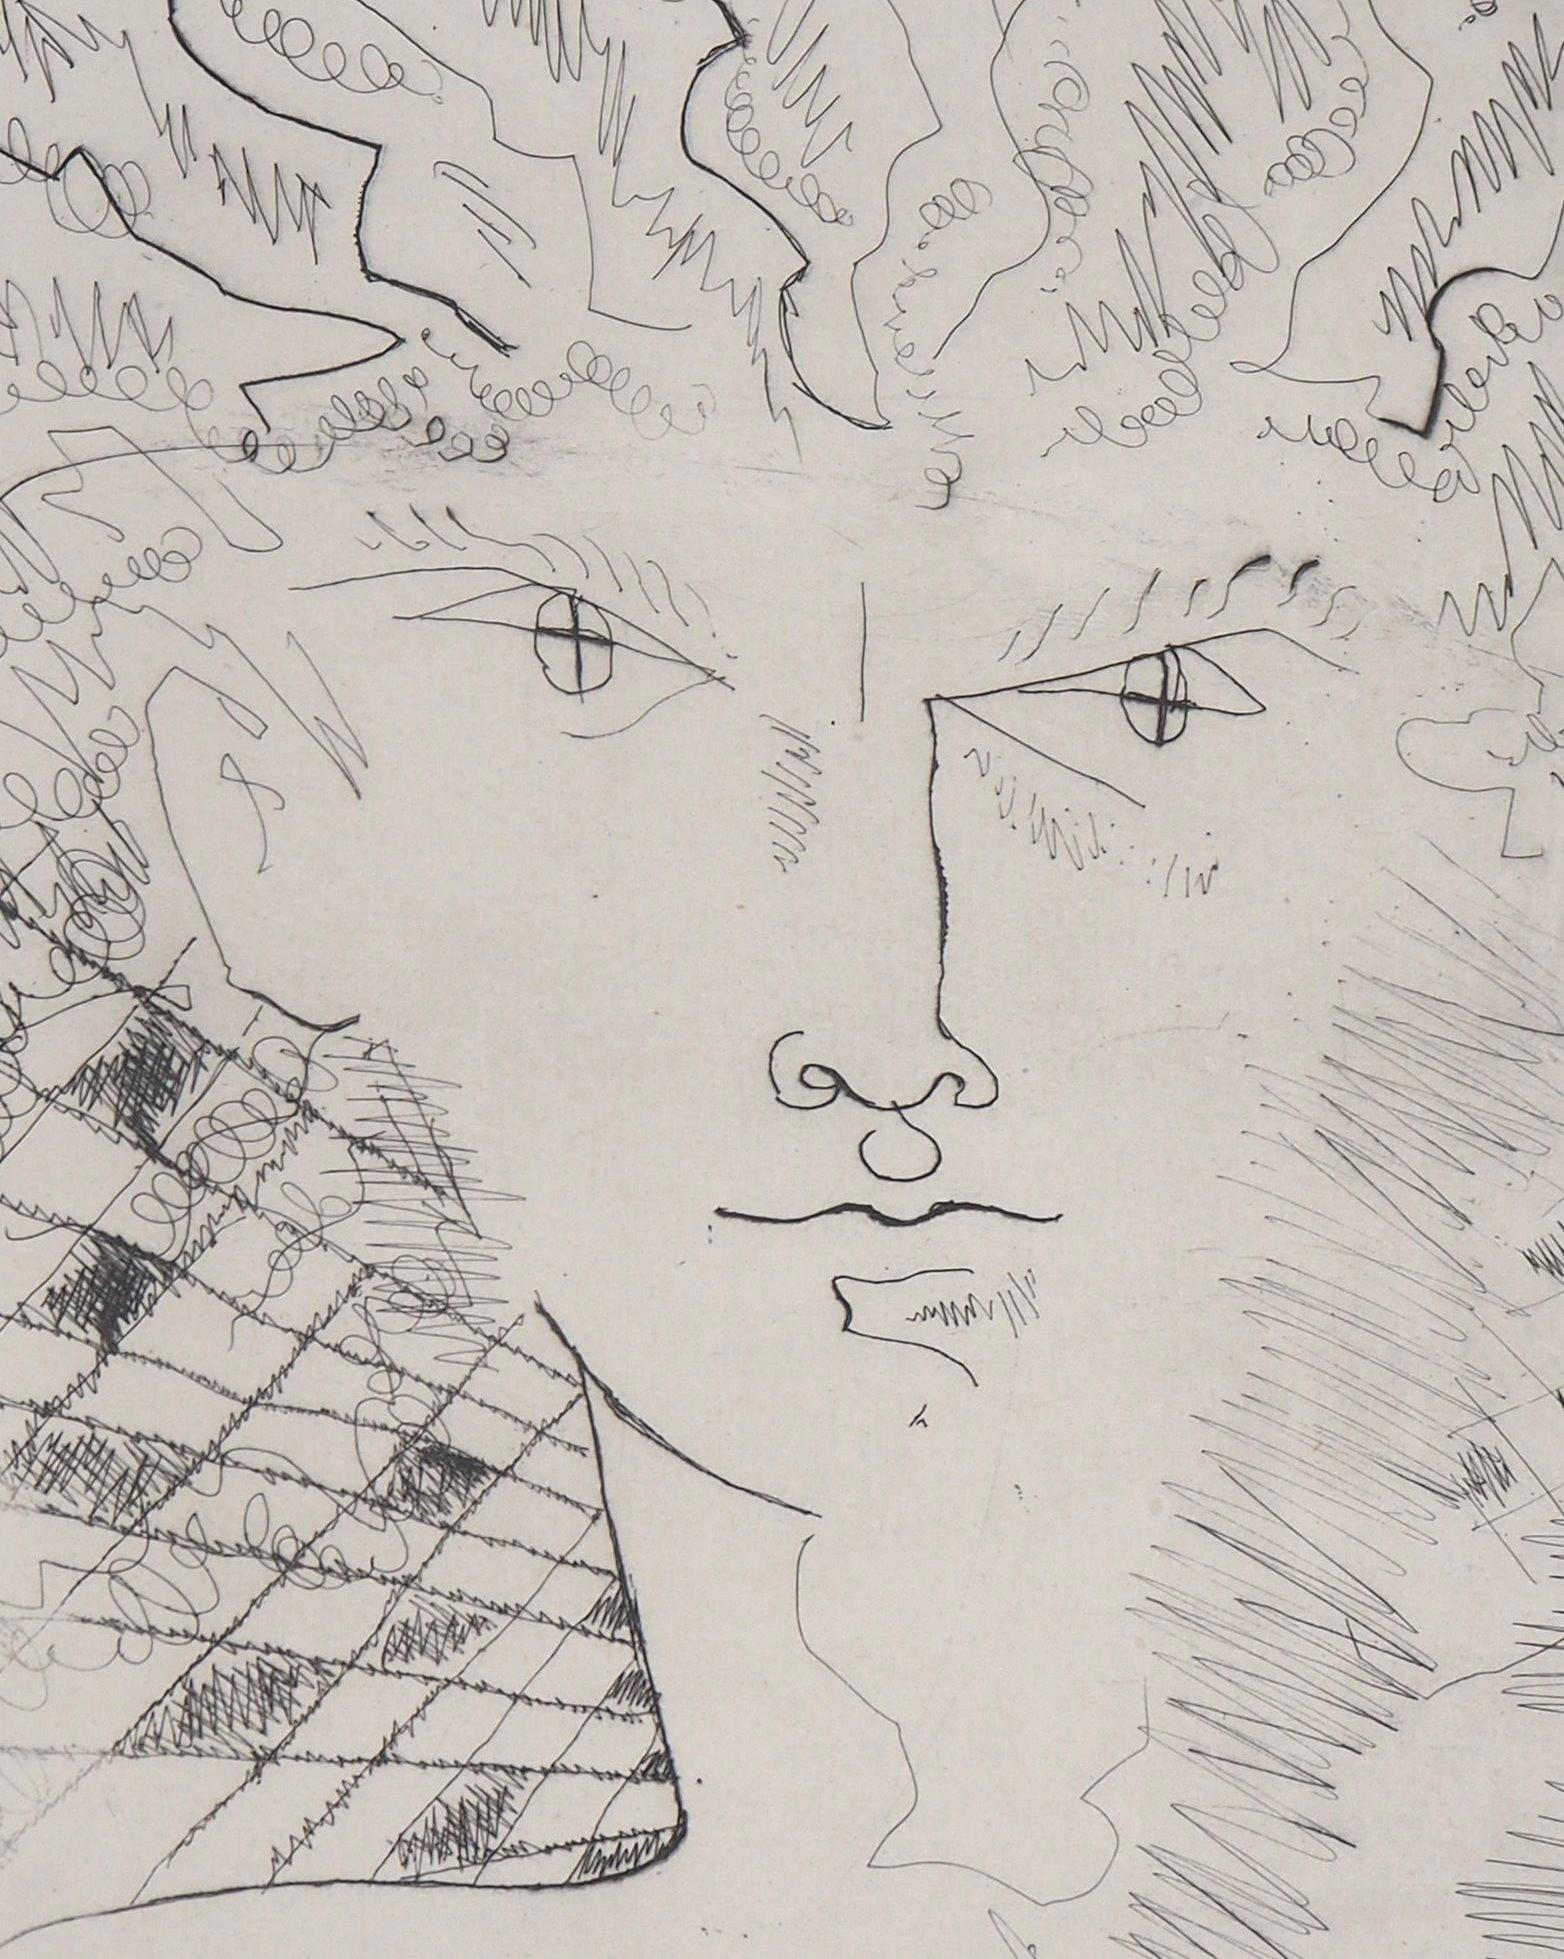 Jean Cocteau
Surrealist Portrait, 1946

Original etching
Printed signature in the plate
On BFK Rives vellum, 32,5 x 25 cm (c. 12,7 x 9,8 inch)
Edition limited to 300 copies (unnumbered exemplars)

INFORMATION : This etching is a part of the set